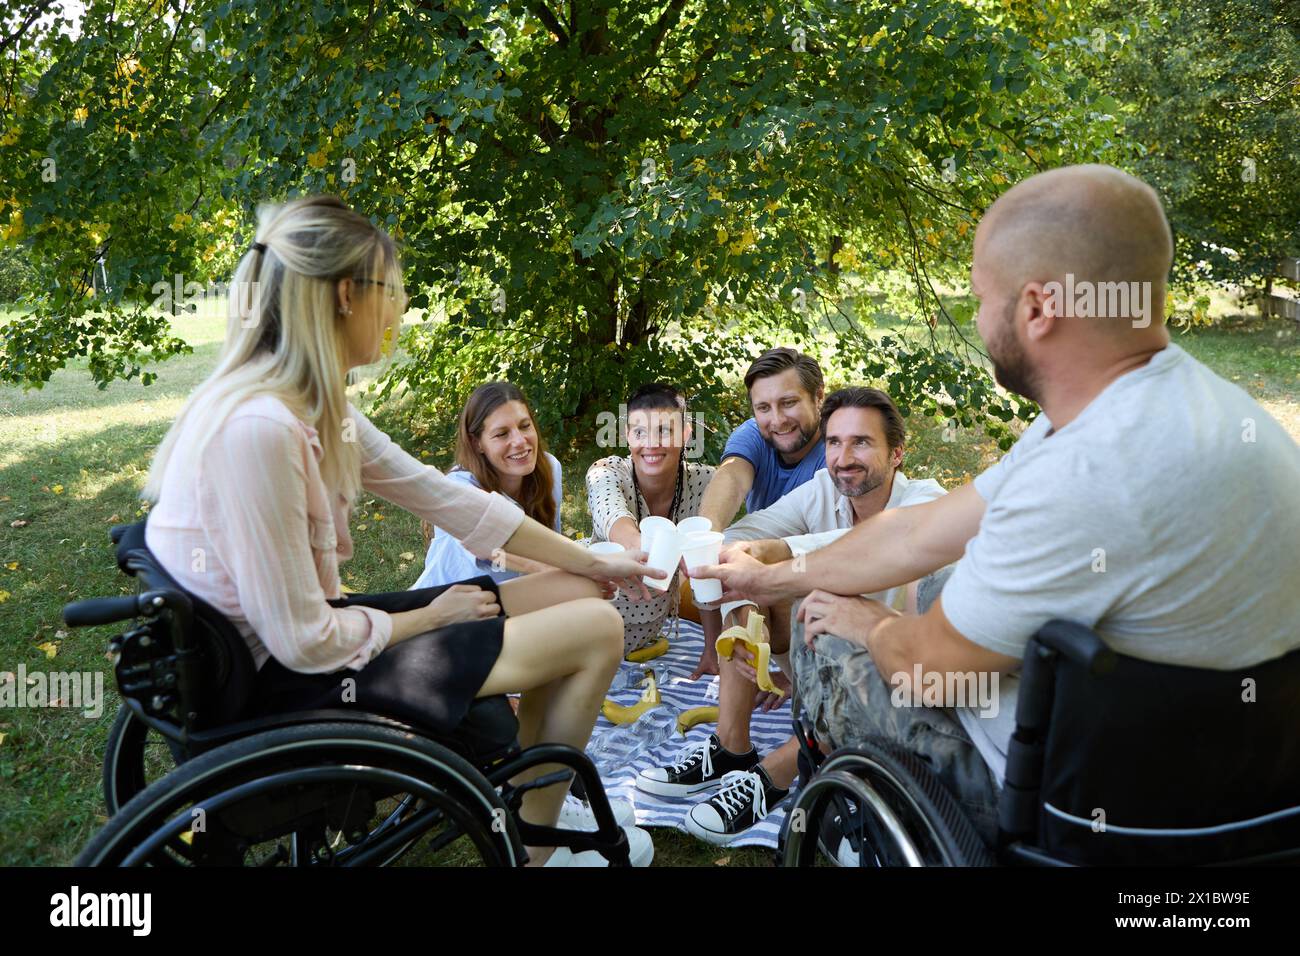 A diverse group of friends, including persons using wheelchairs, sharing a joyful picnic outdoors on a sunny day, highlighting inclusivity and friends Stock Photo